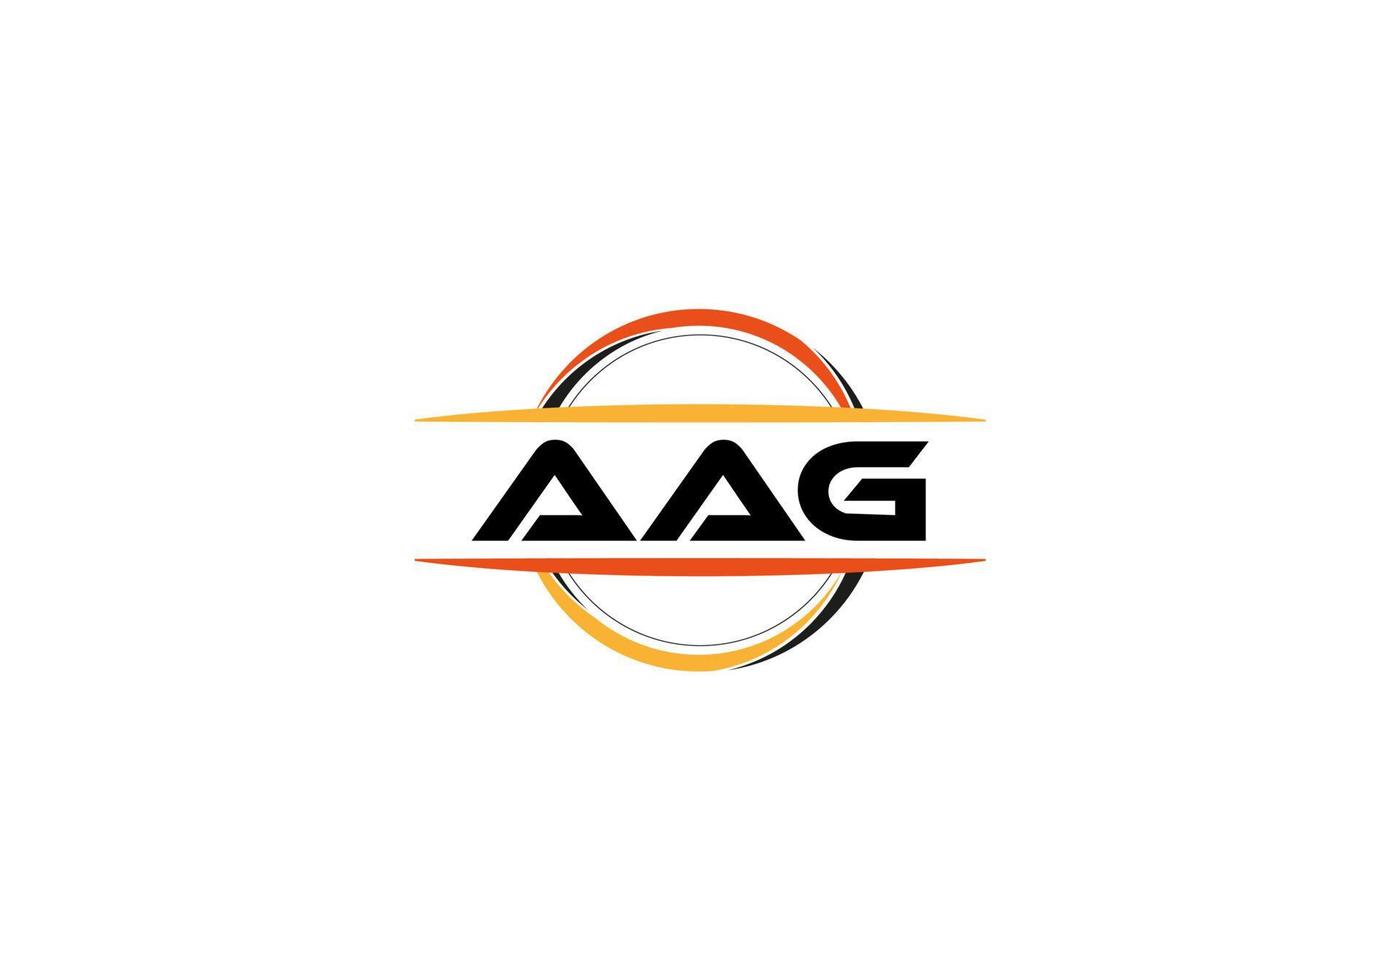 AAG letter royalty ellipse shape logo. AAG brush art logo. AAG logo for a company, business, and commercial use. vector